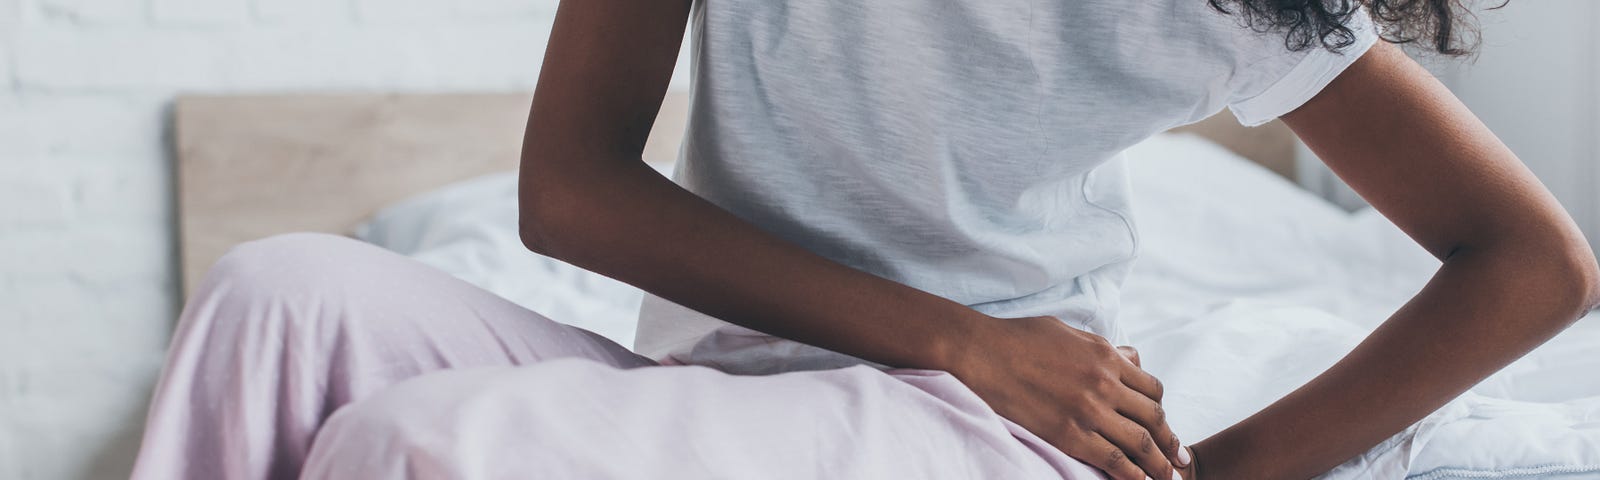 Cropped view of woman suffering from pain in hip while sitting on bed